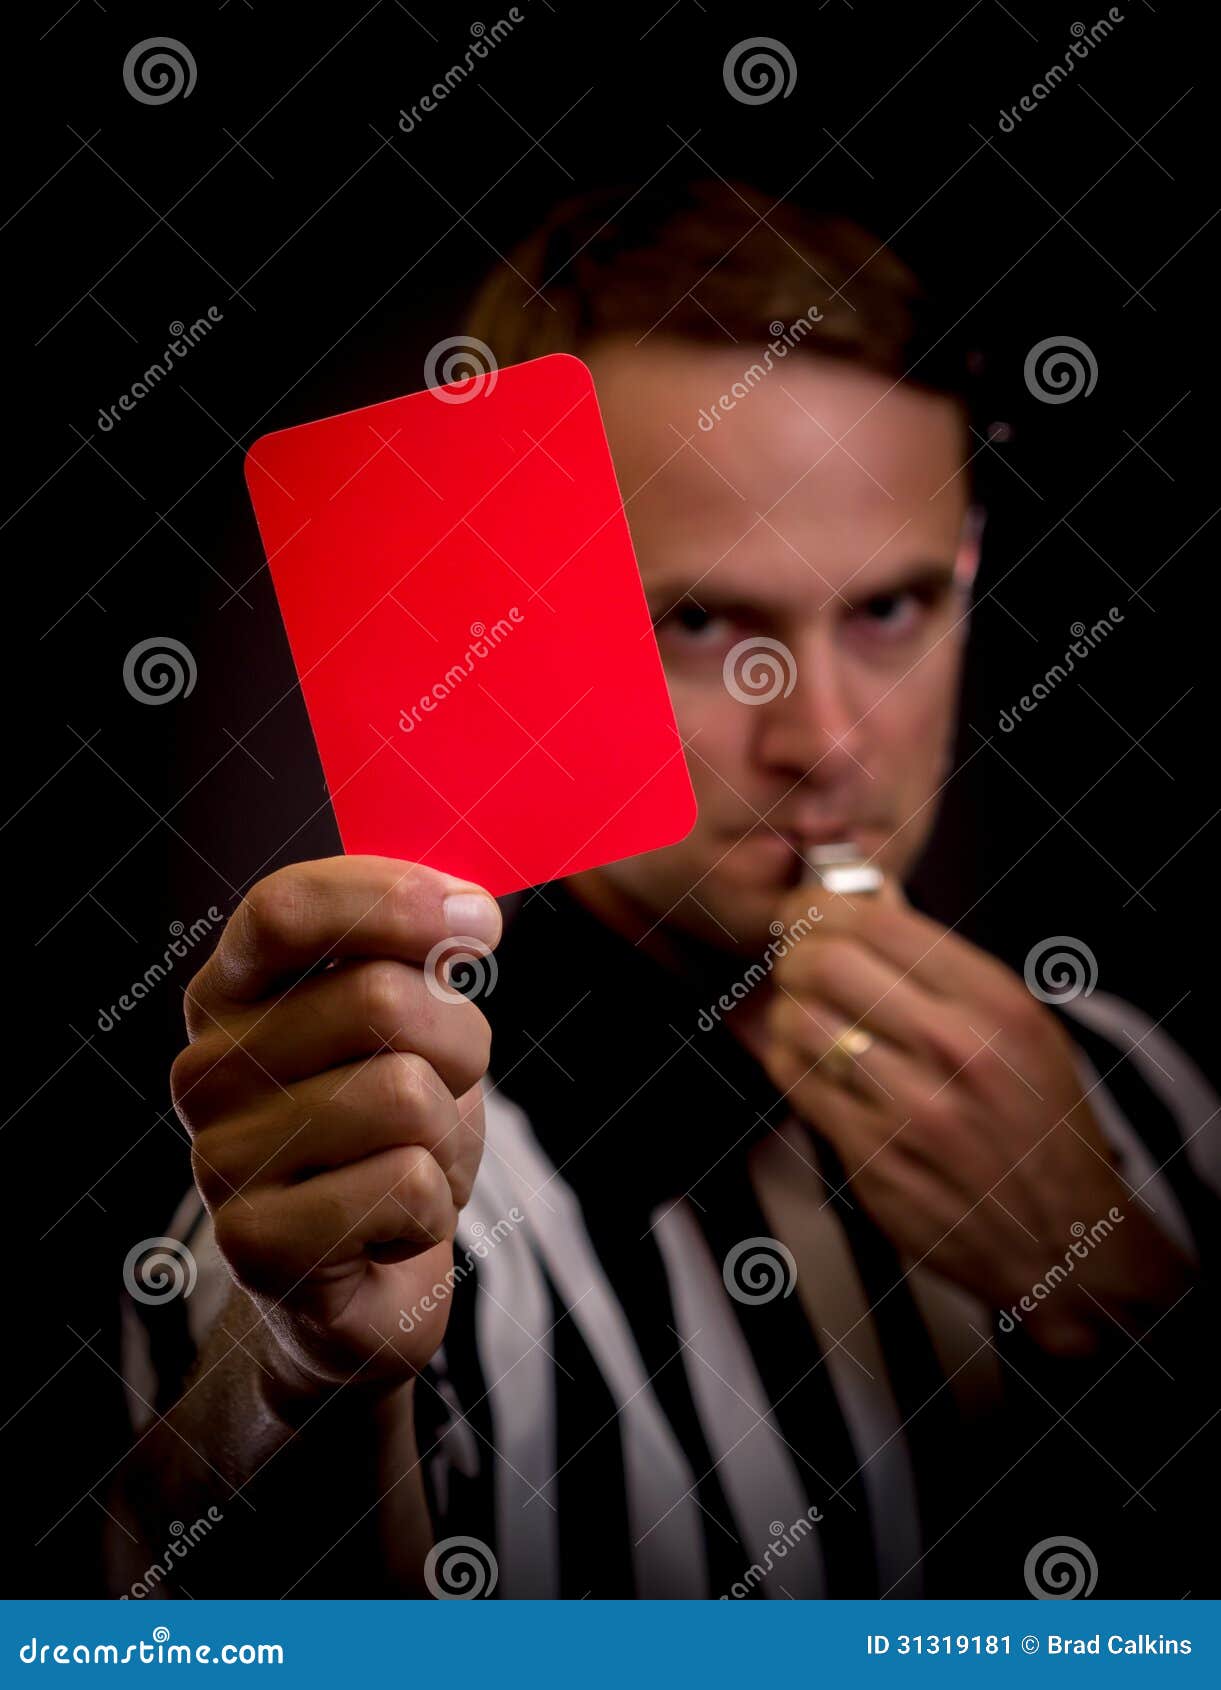 Soccer Referee Holding Out a Red Card Stock Photo - Image of disqualified,  judgment: 210187792